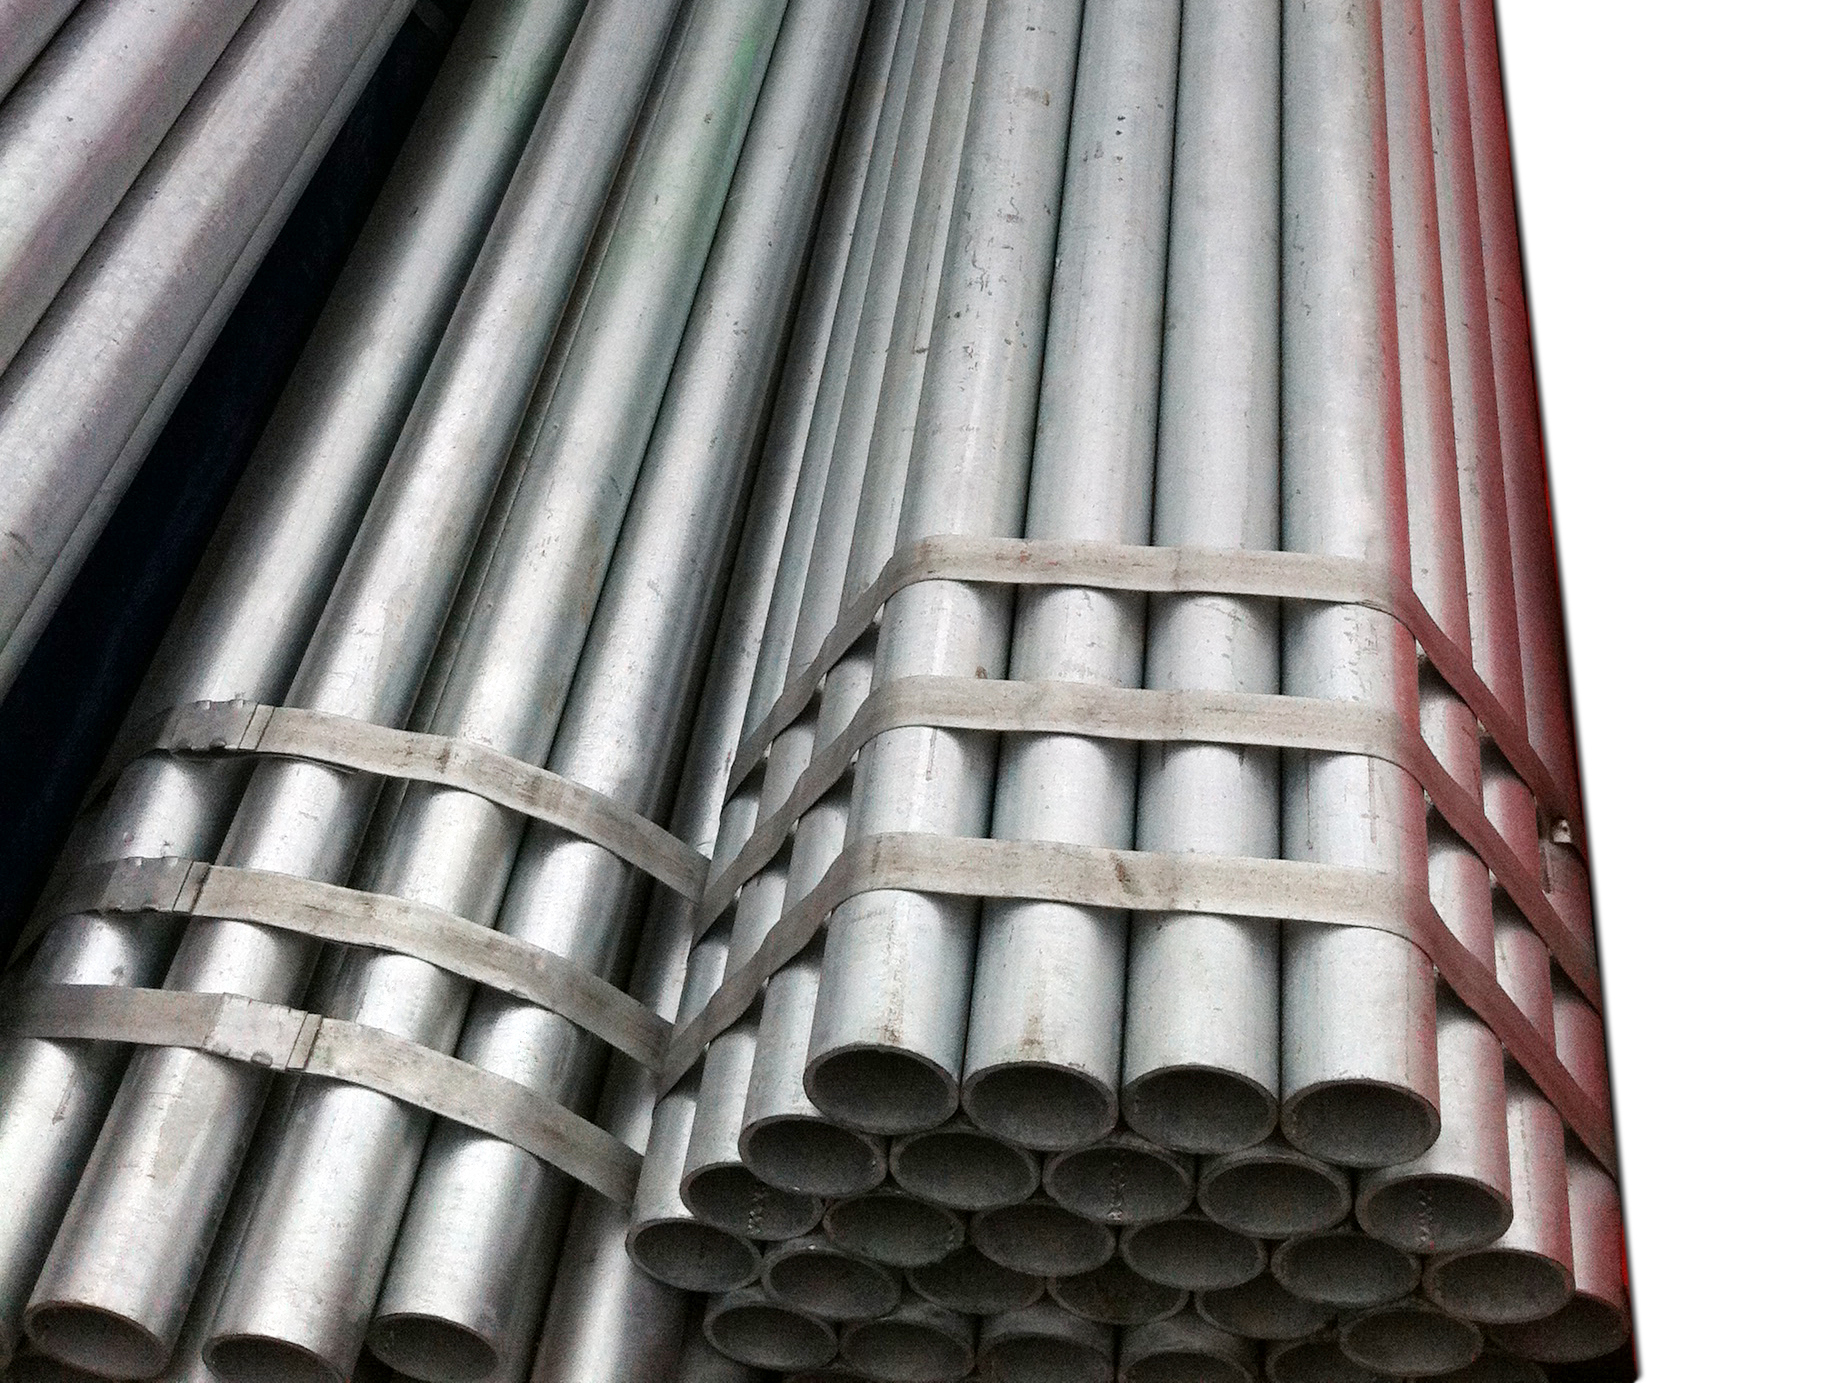 2 inch schedule 40 galvanized steel pipe | ZS Steel Pipe